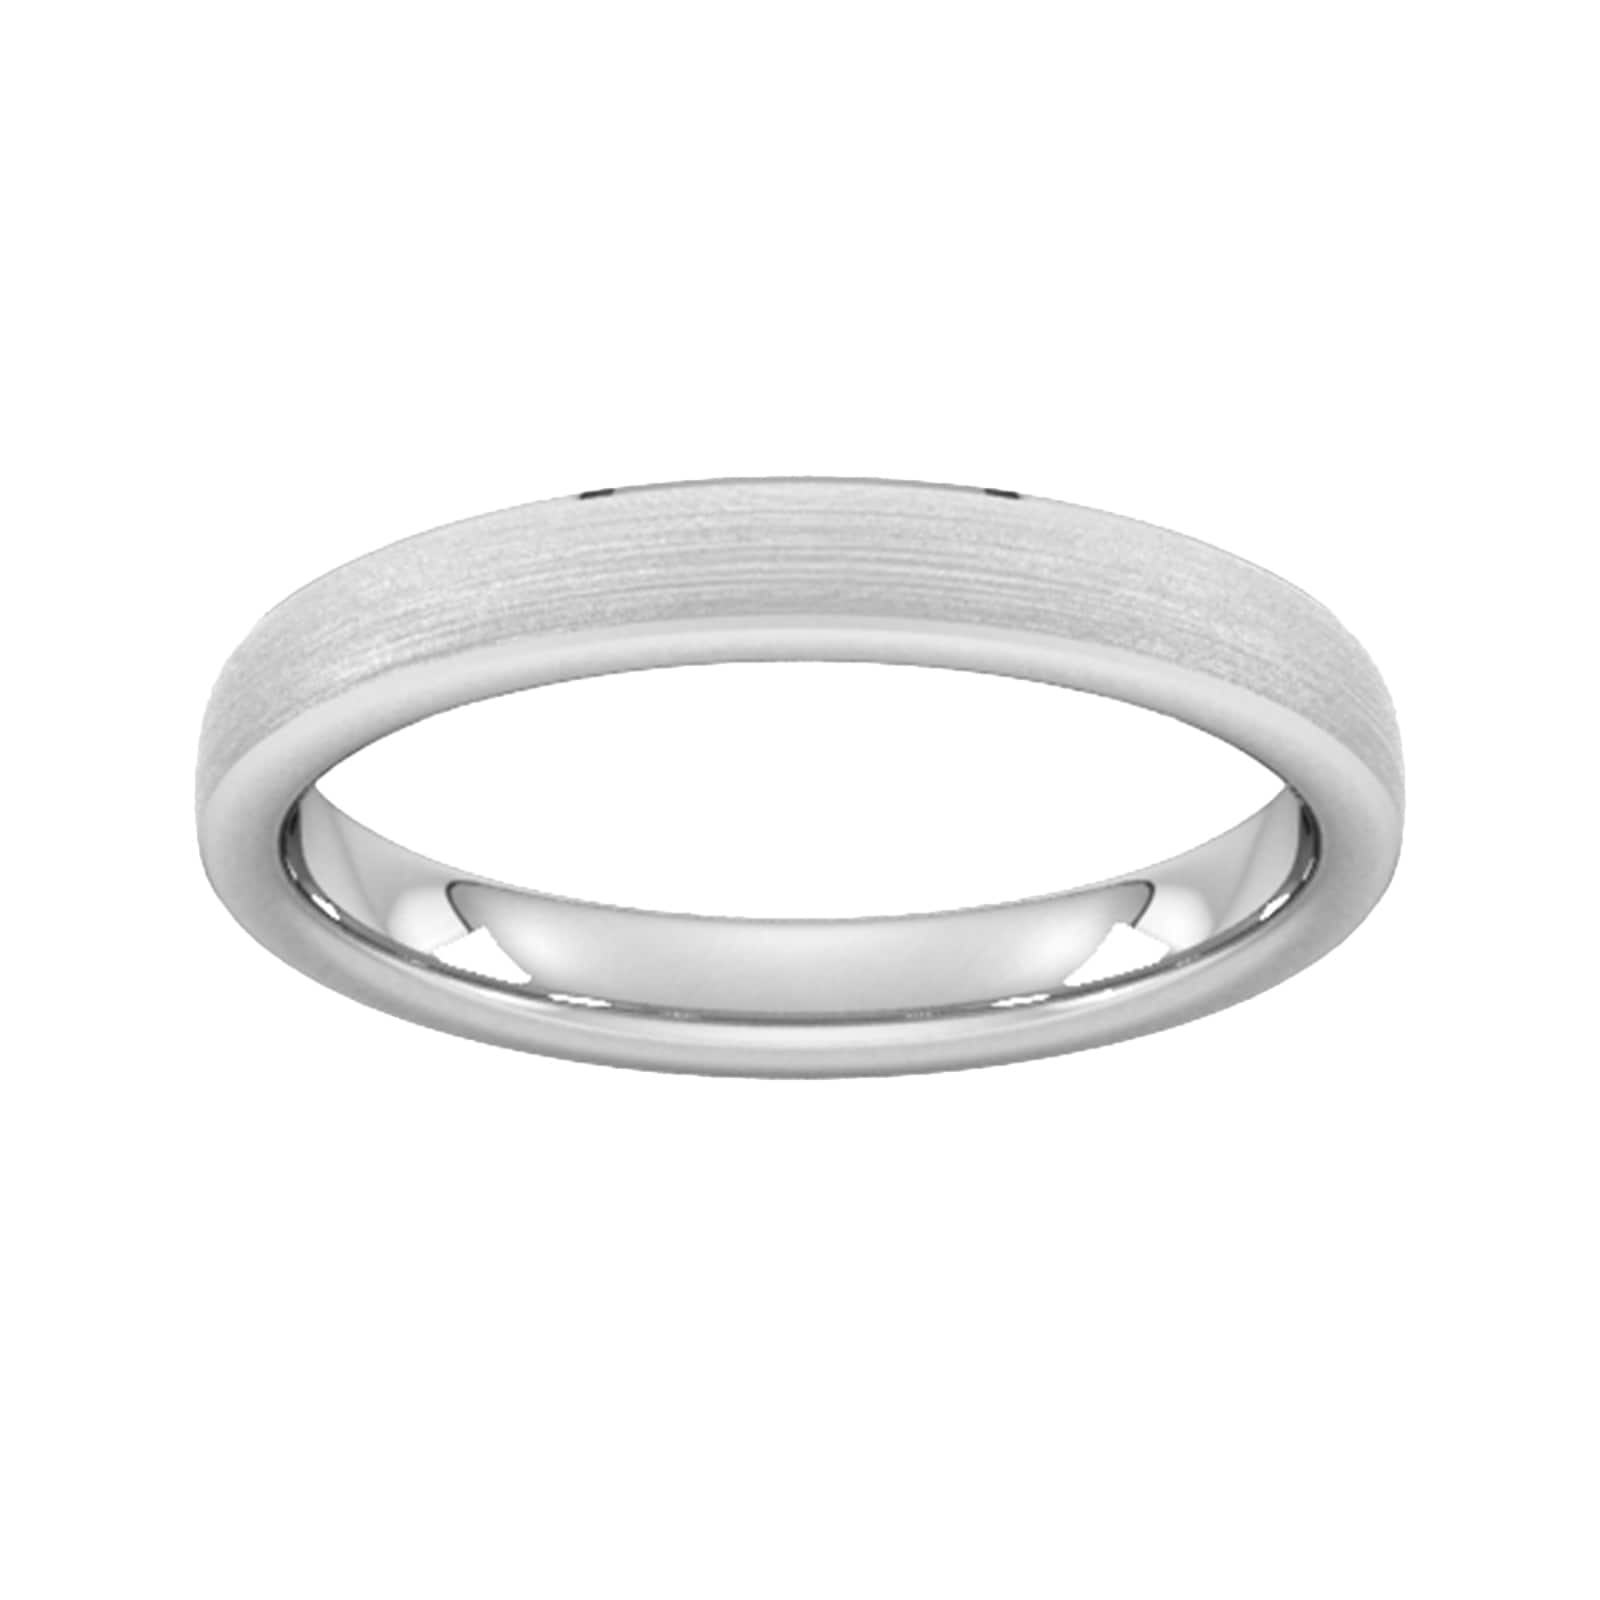 3mm D Shape Standard Polished Chamfered Edges With Matt Centre Wedding Ring In 9 Carat White Gold - Ring Size I